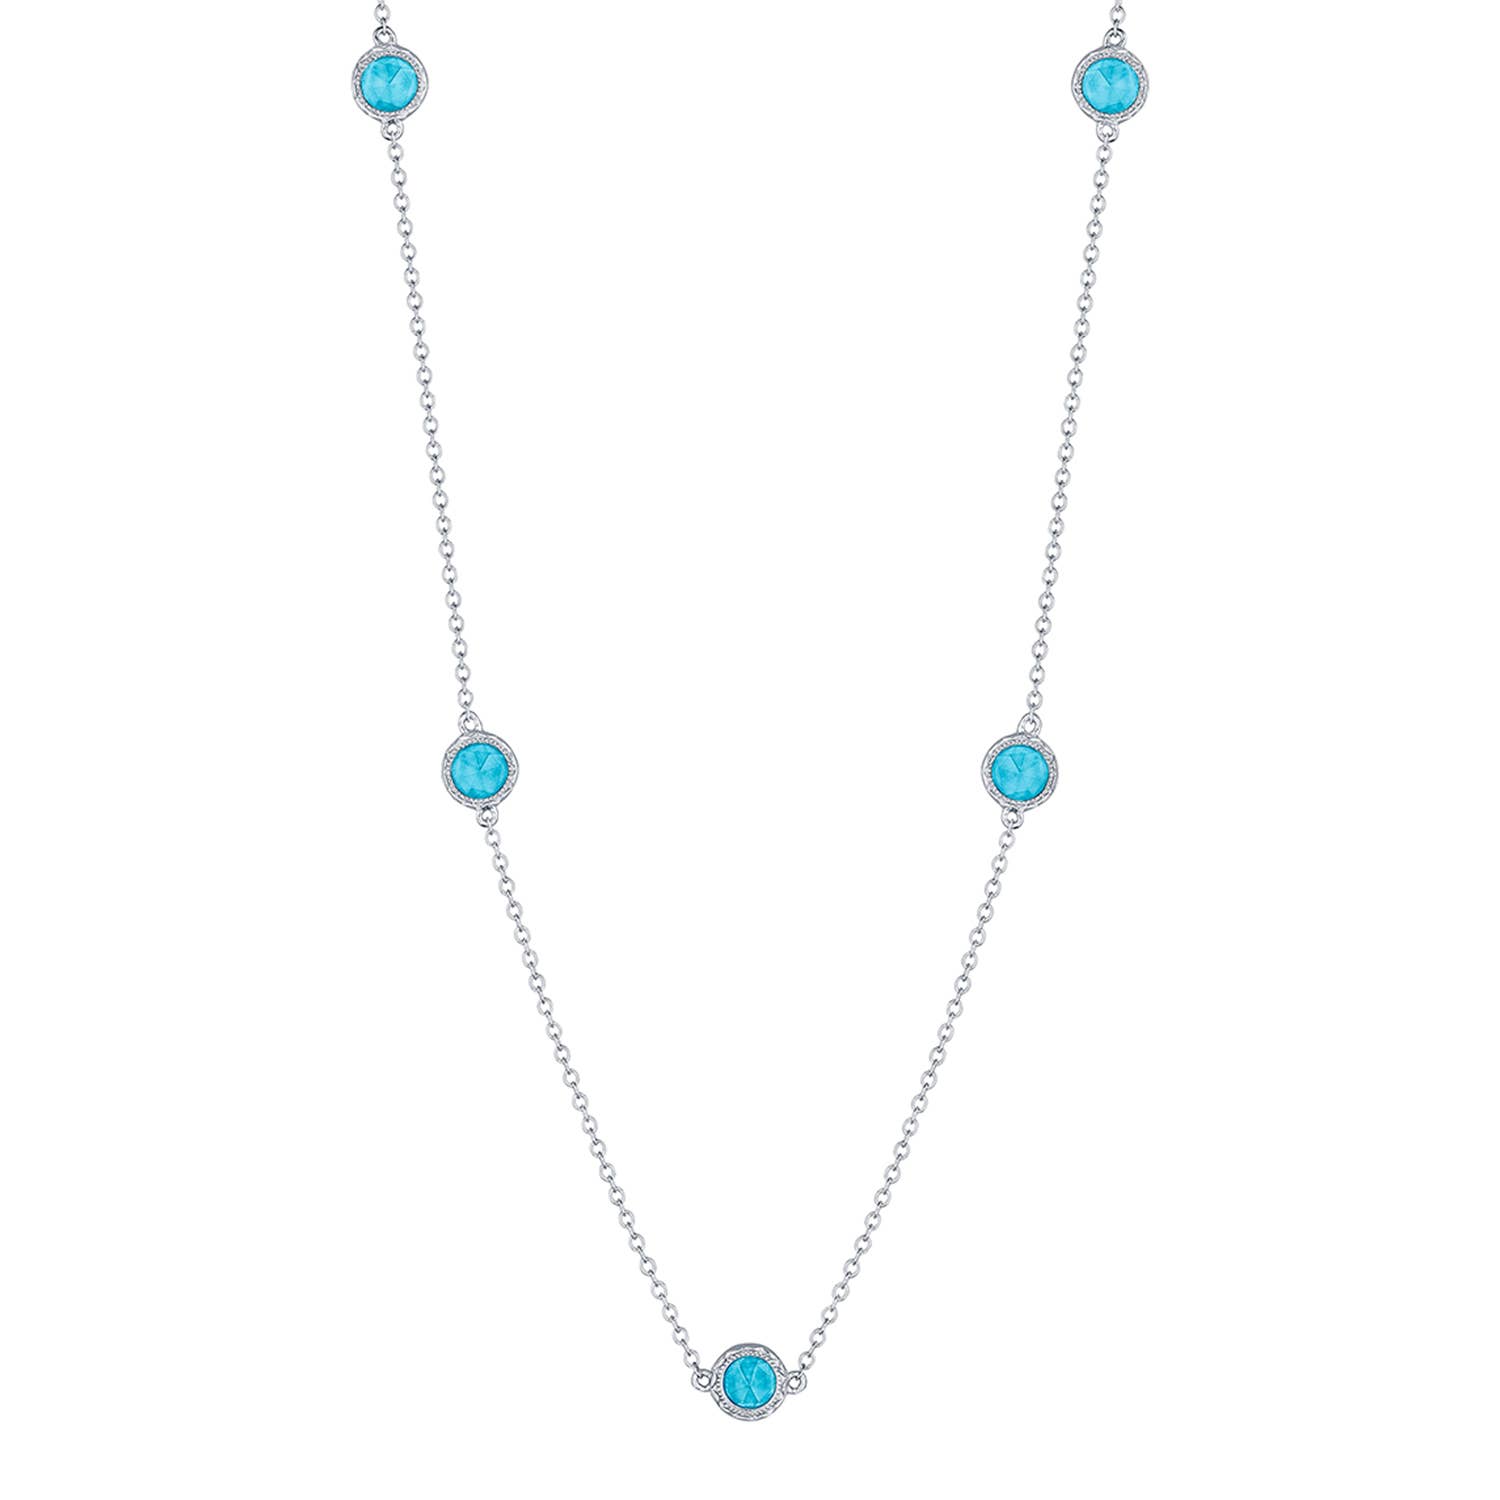 5 Station Necklace with Swiss Blue Topaz